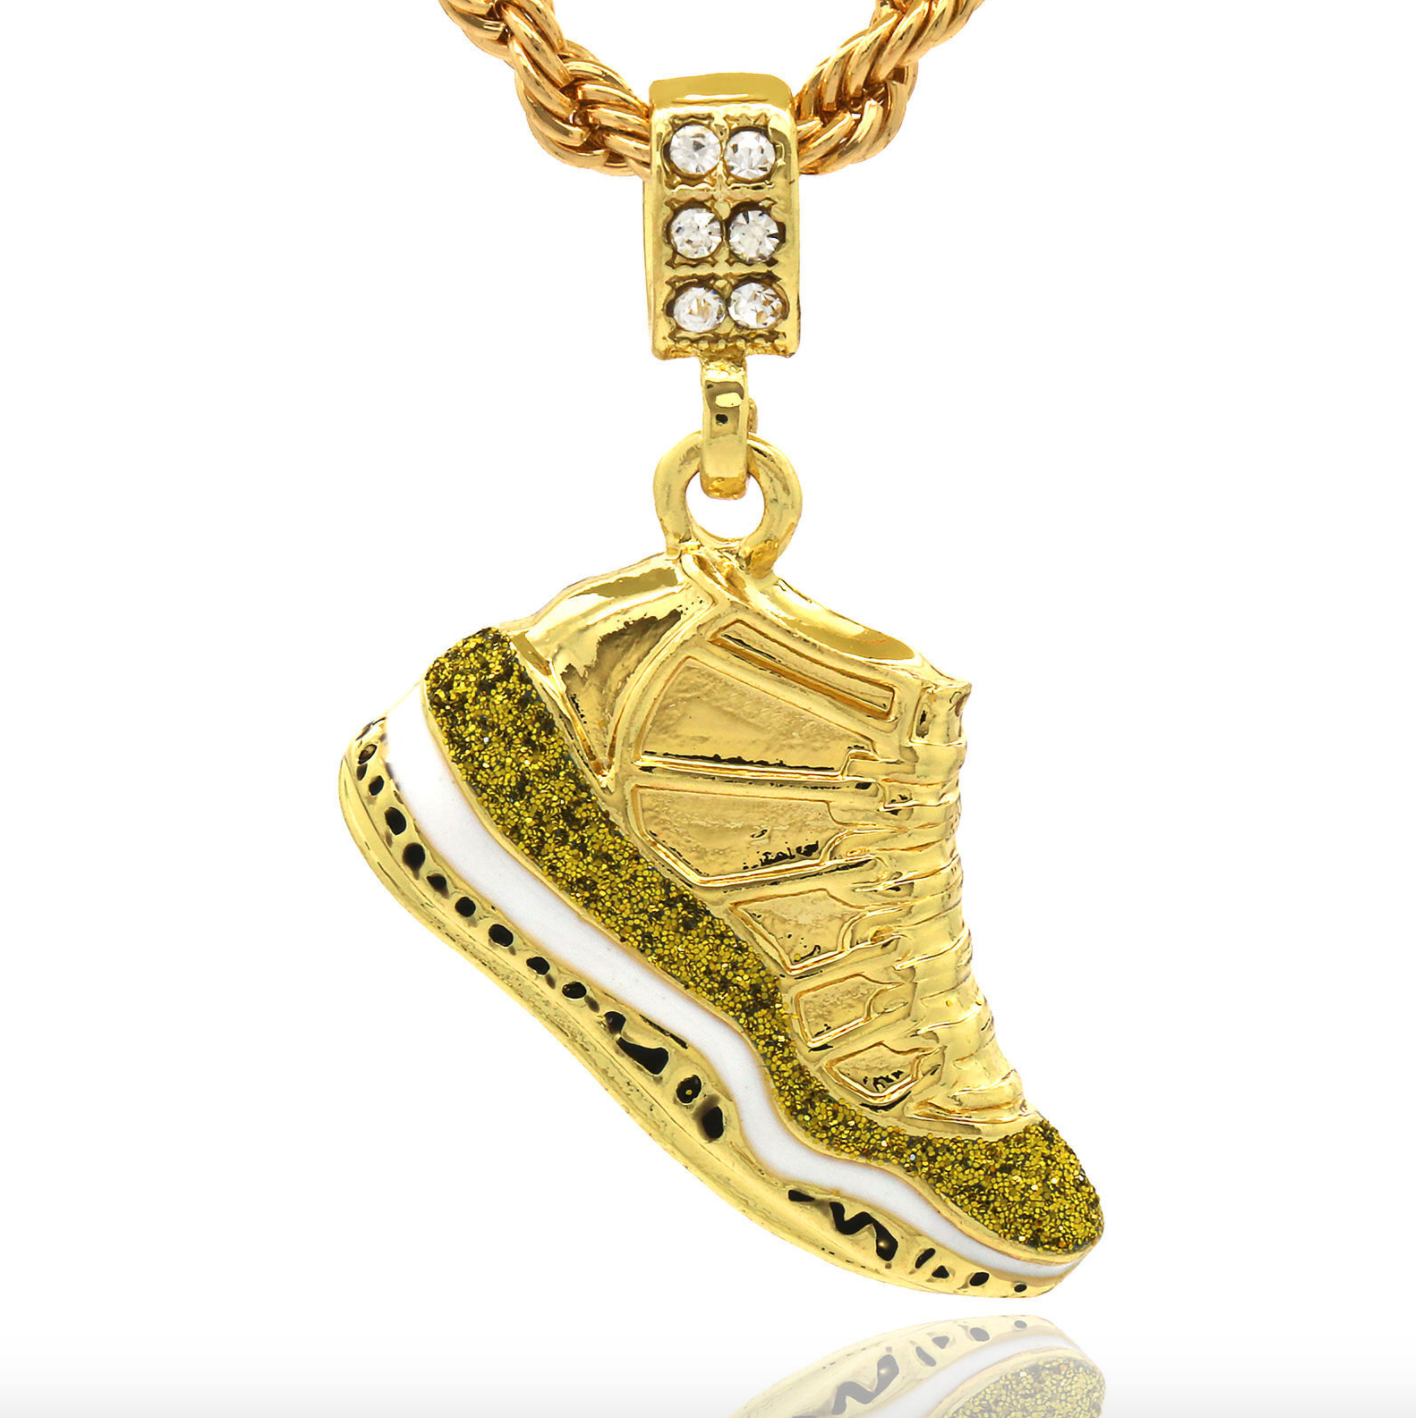 Jordan 11 Shoe Pendant 23 Chain Shoe Necklace Simulated Diamond Hip Hop Rapper Iced Out Gold Silver Metal Alloy 24in.